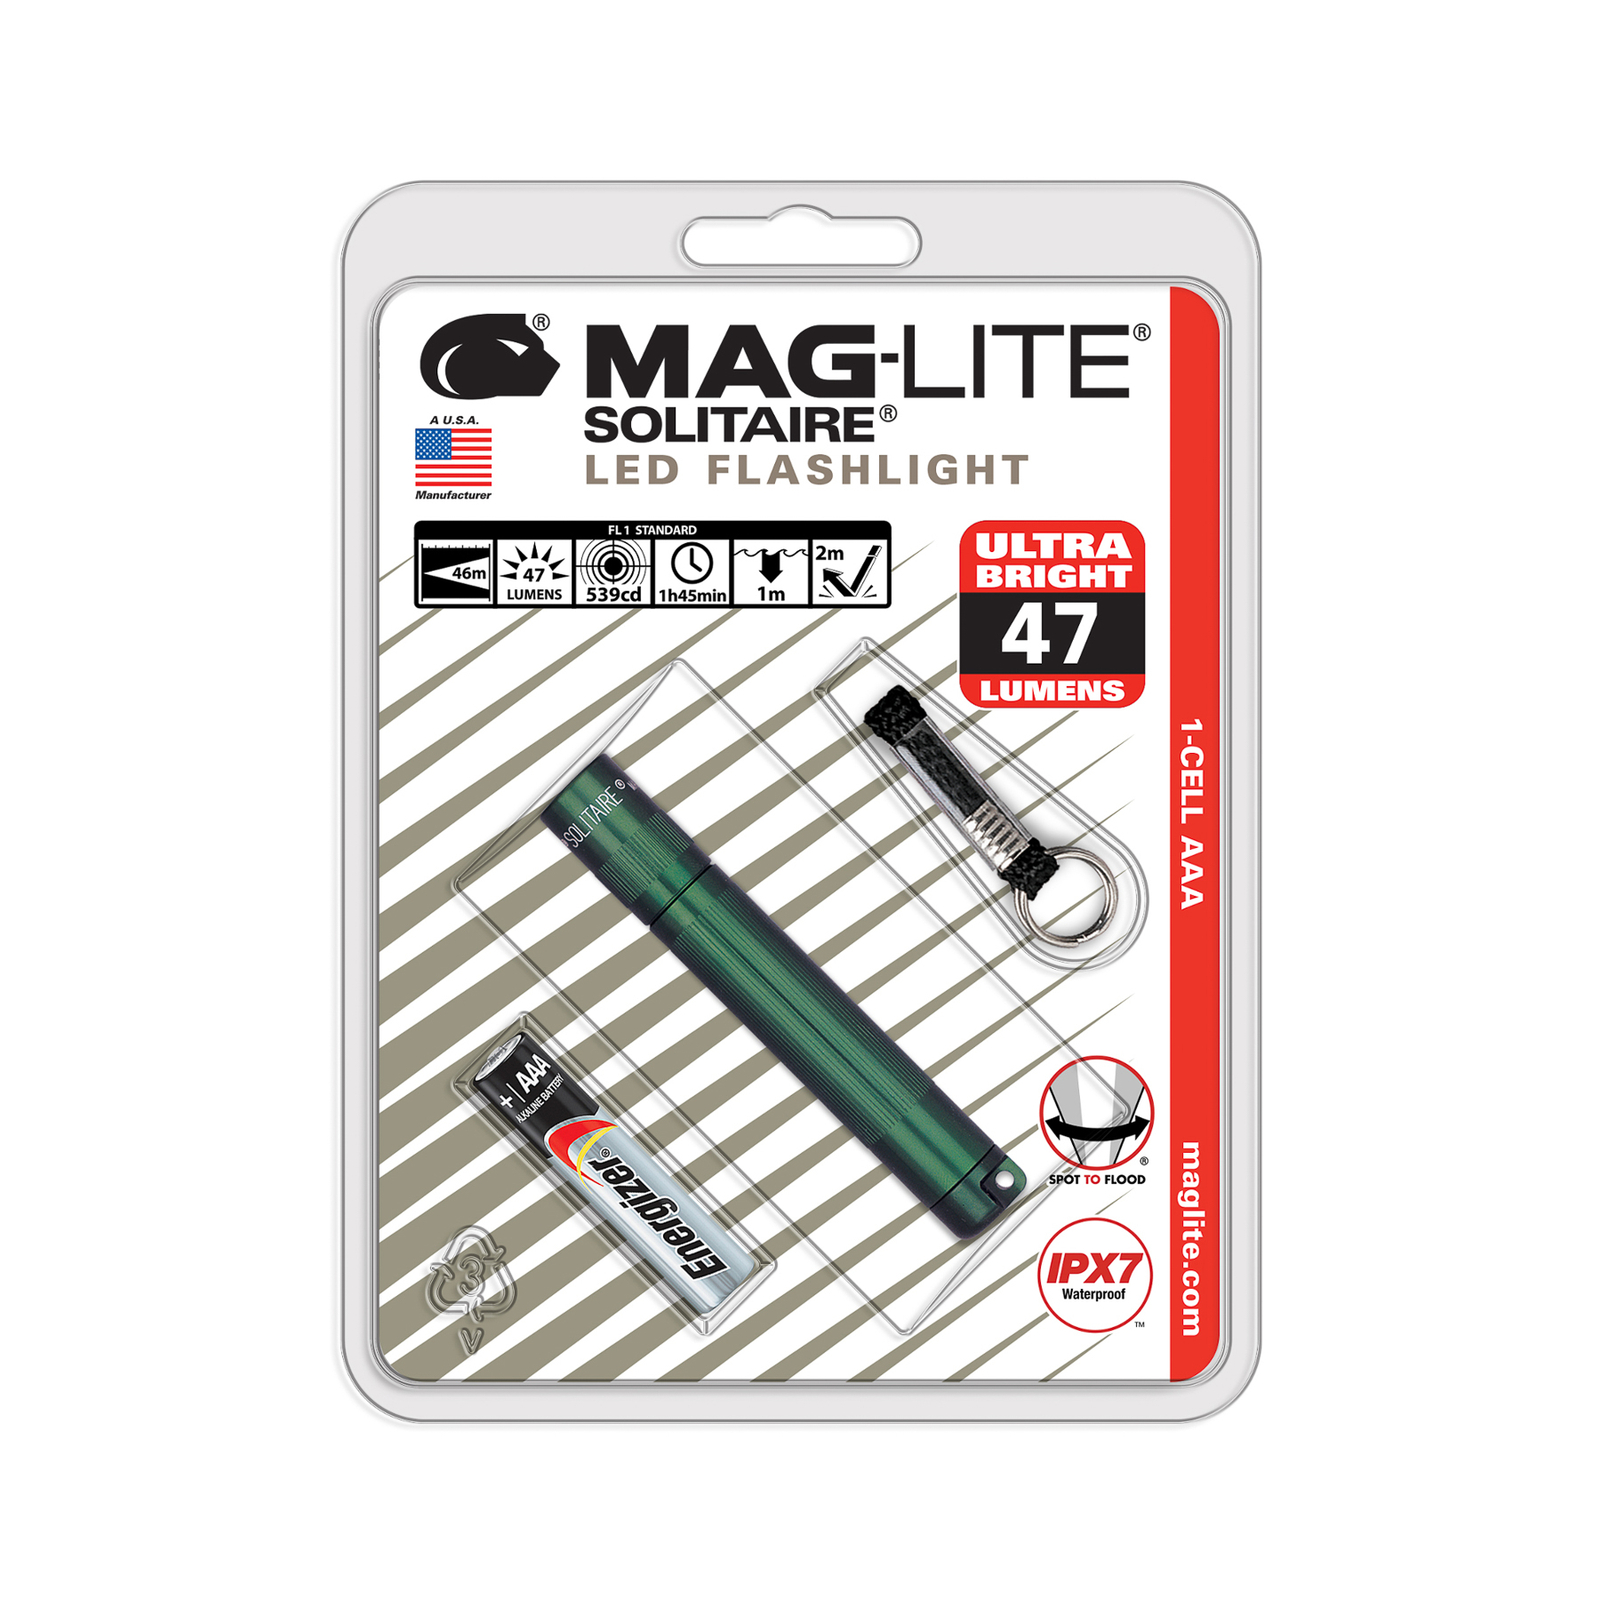 Maglite Linterna LED Solitaire, 1 Cell AAA, verde